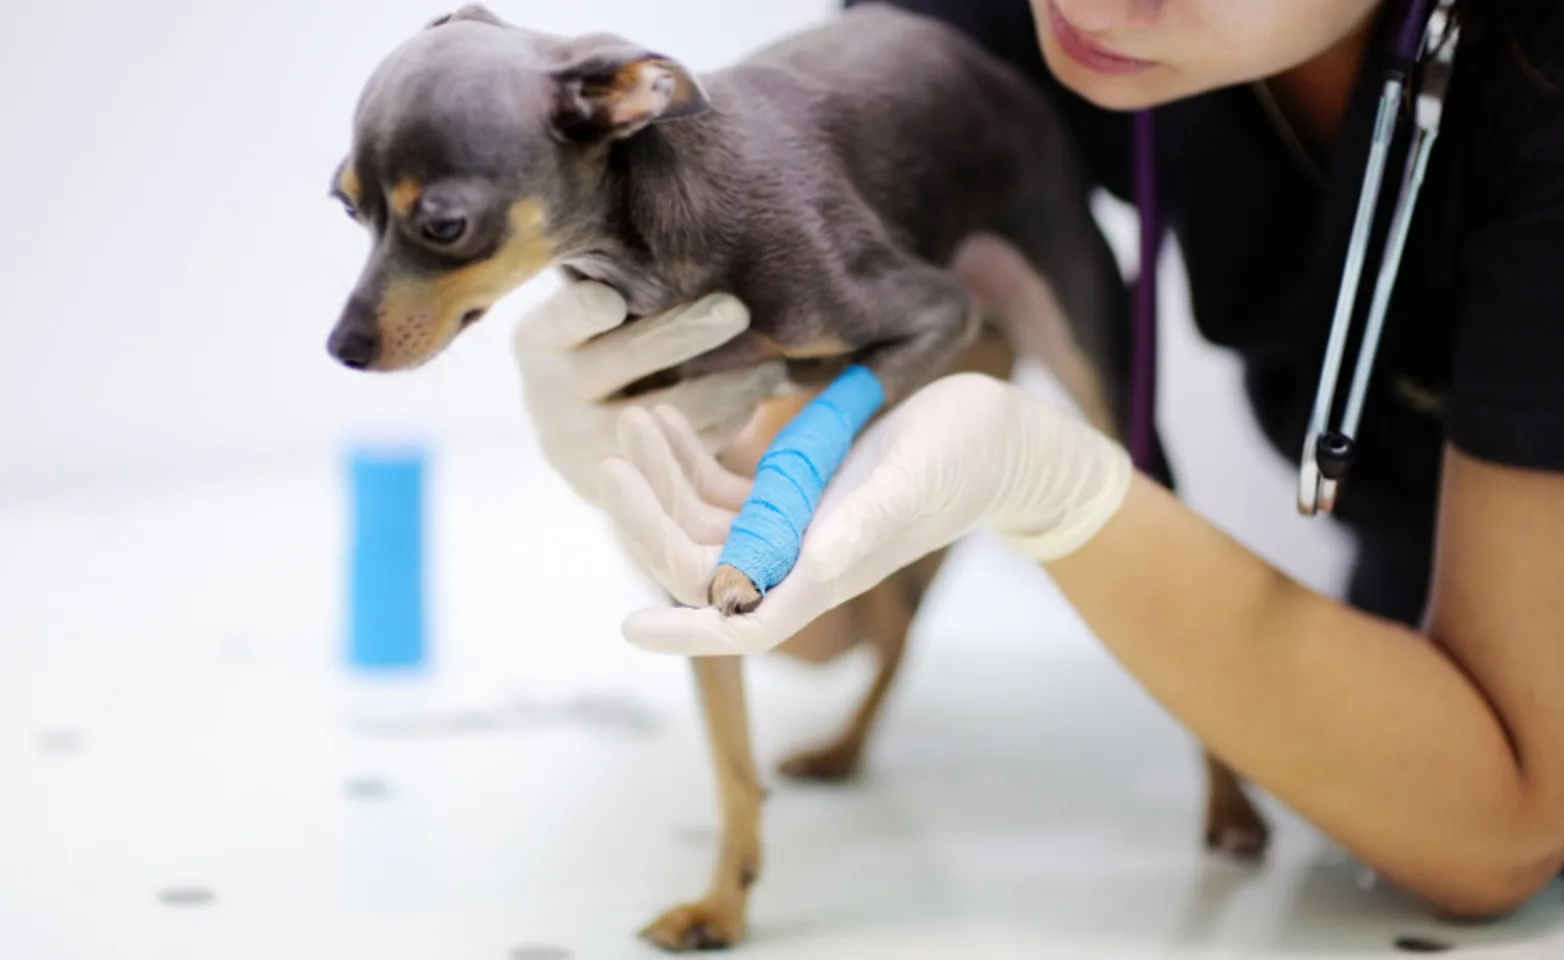 Veterinarian Helping a Dog with an Injured Leg